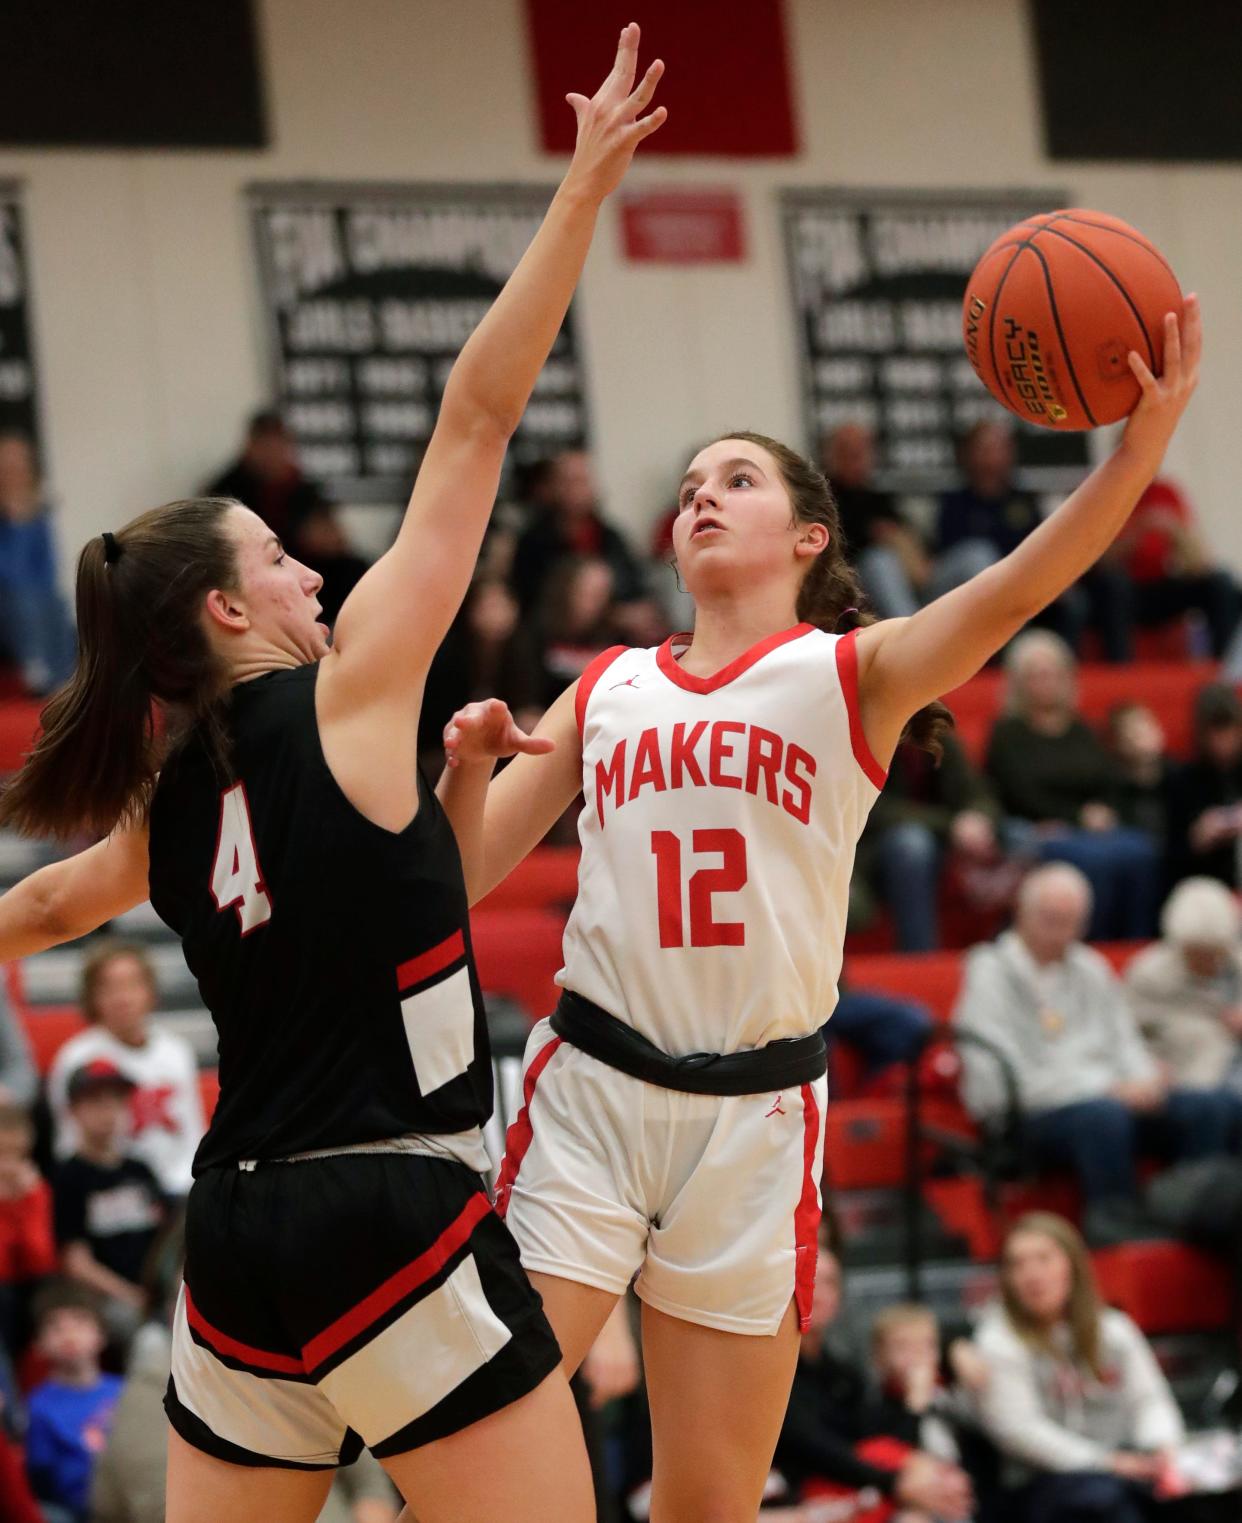 Kimberly's Kate McGinnis (12) puts up a shot against Hortonville's Rainey Welson during their girls basketball game Jan. 20 in Kimberly. McGinnis recently verbally committed to Belmont University.